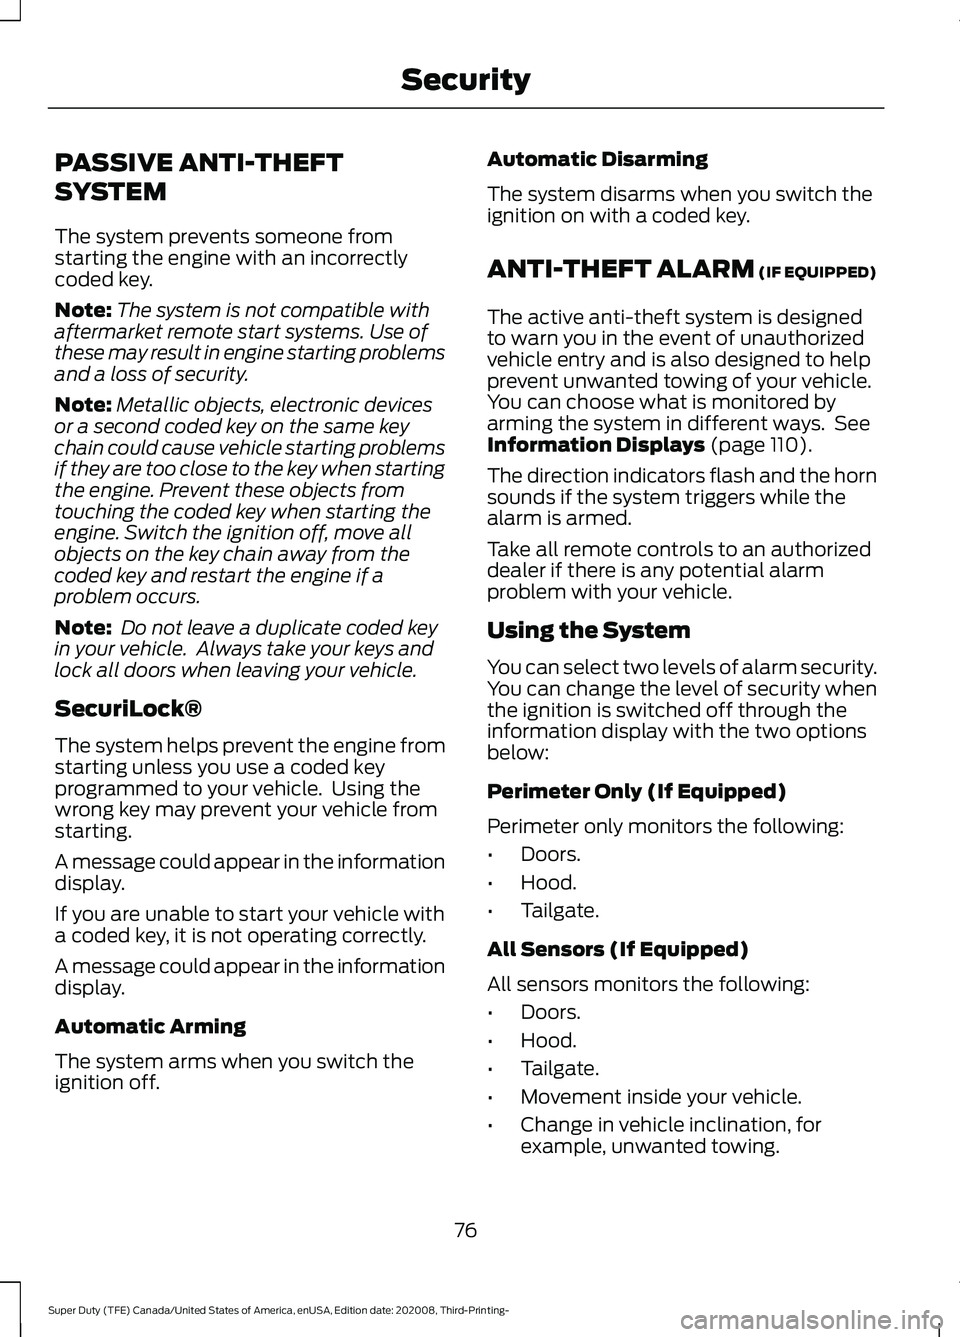 FORD F-600 2021  Owners Manual PASSIVE ANTI-THEFT
SYSTEM
The system prevents someone from
starting the engine with an incorrectly
coded key.
Note:
The system is not compatible with
aftermarket remote start systems. Use of
these may